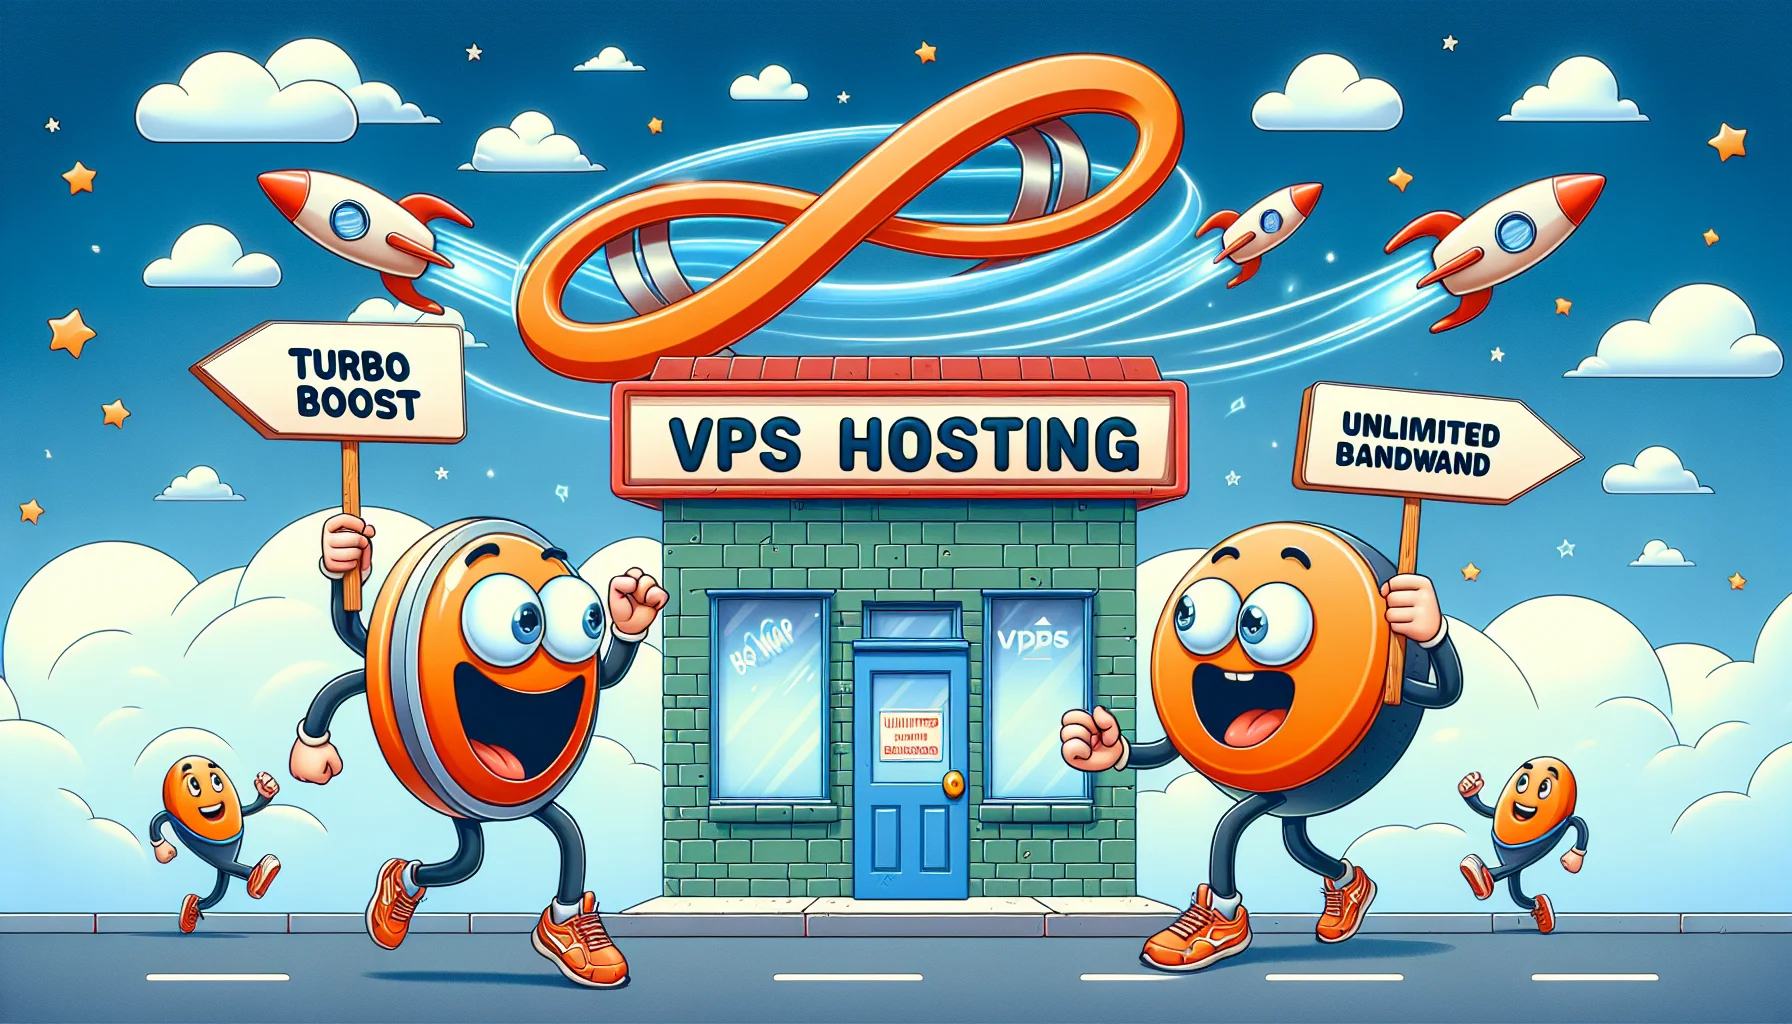 Create a complex image commensurate with a fun and lighthearted scenario that might entice consumers interested in web hosting. In the center, there could be a metaphorical storefront labeled 'VPS Hosting.' Outside the store, two mascots are enthusiastically promoting the hosting plans. One is an anthropomorphized 'turbo boost' button dressed in running clothes, implying speed and efficiency. The other could be a friendly 'unlimited bandwidth' character holding a large infinity sign, showcasing the ideas of boundlessness and freedom that web hosting could provide an individual or business.